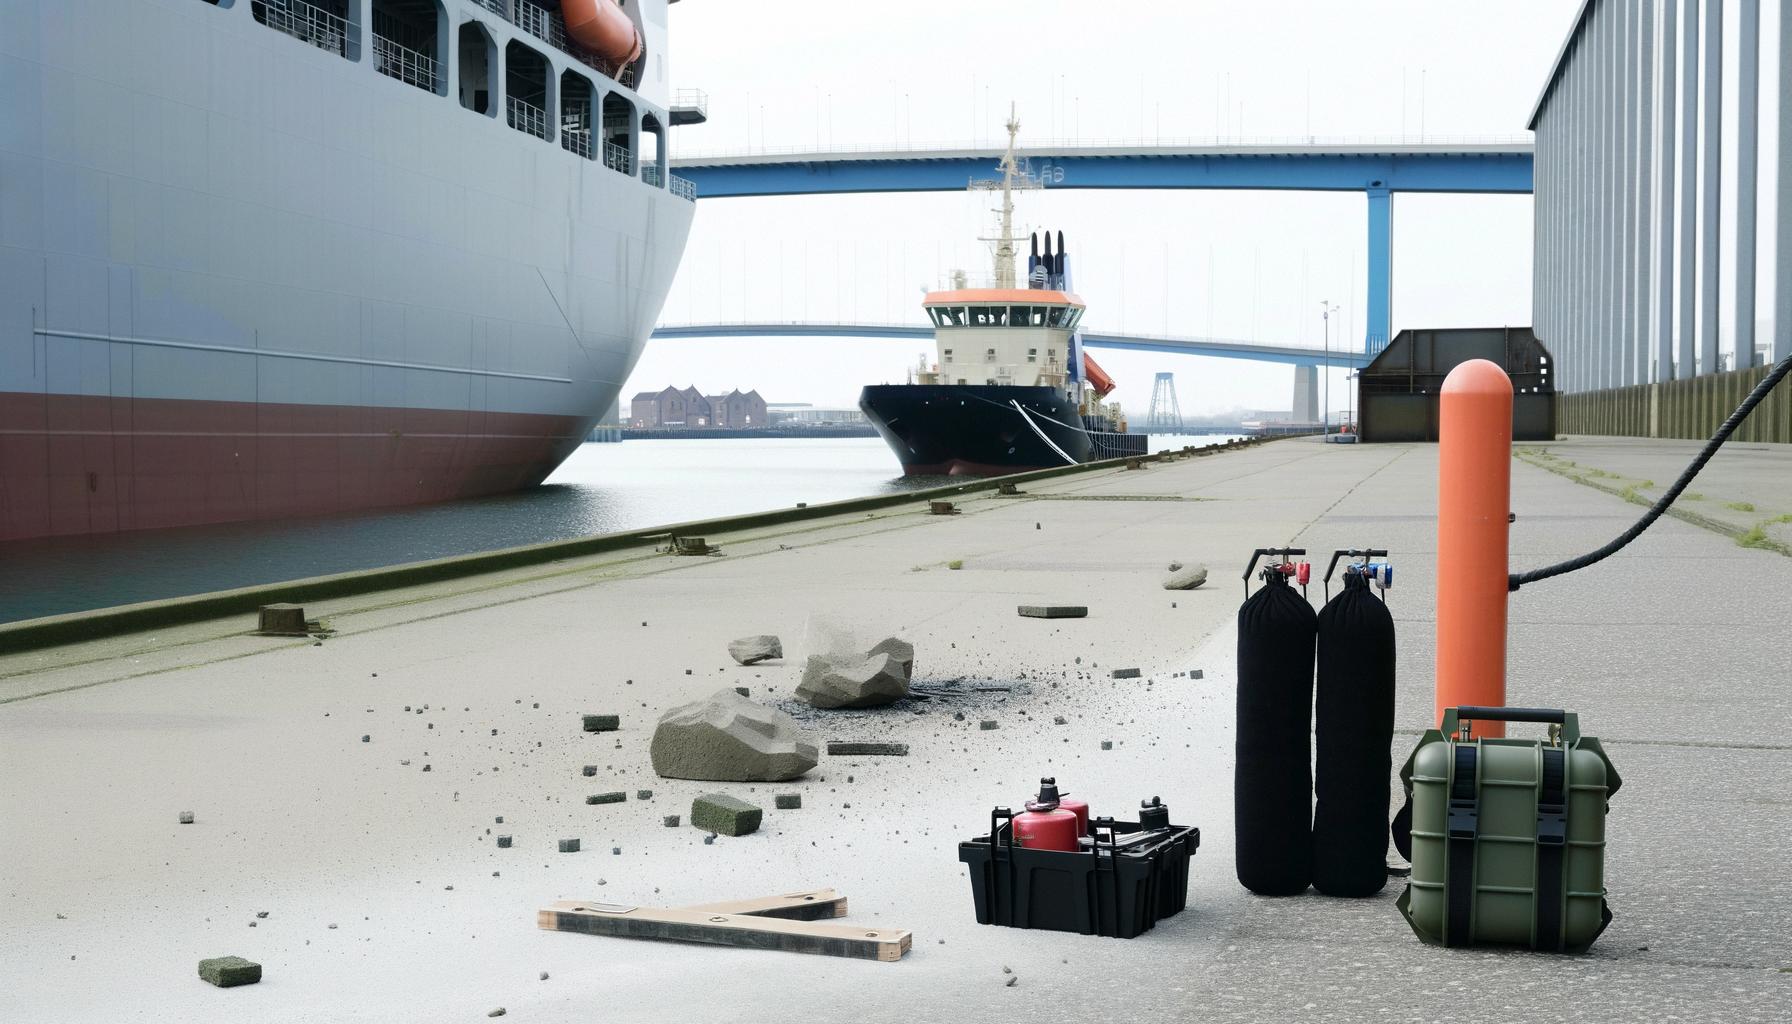 Explosives used to clear remaining bridge debris from ship